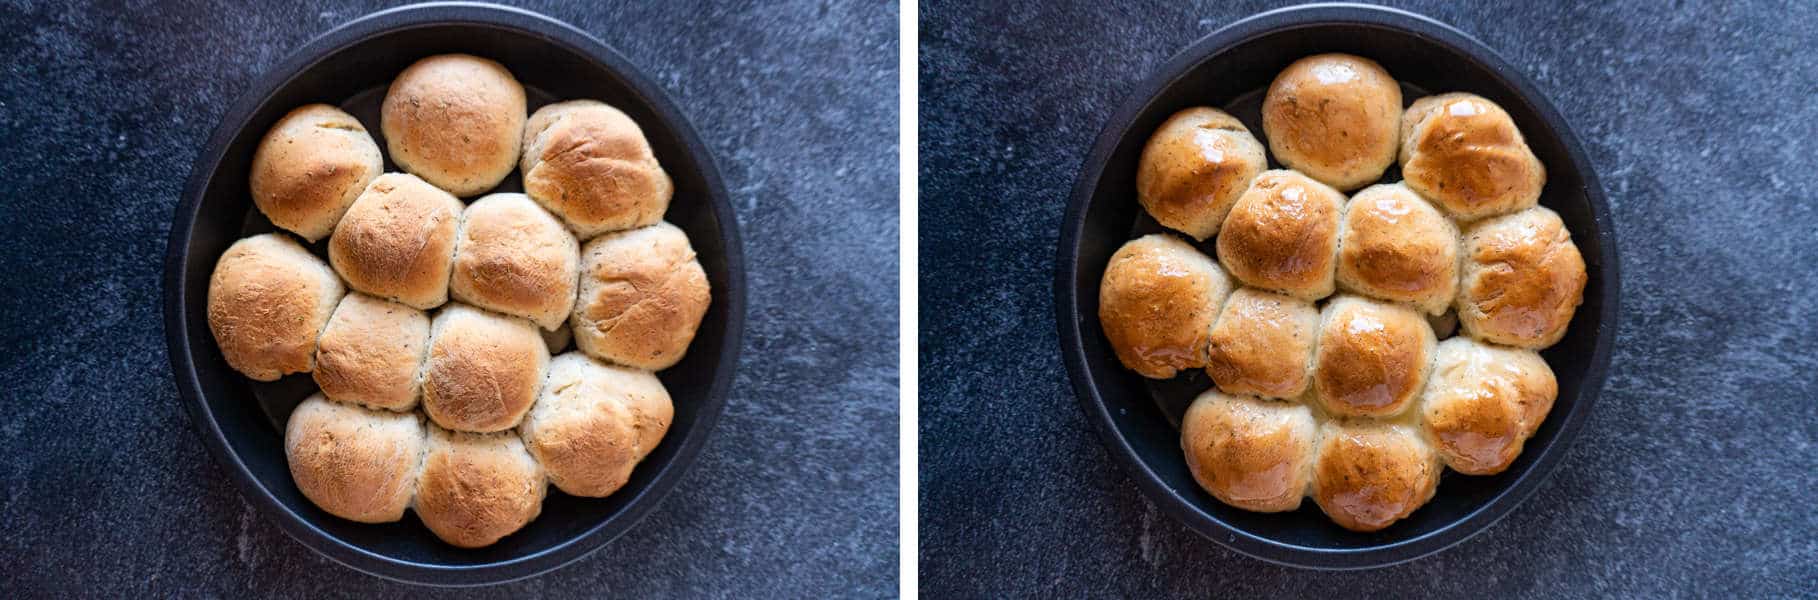 Dinner Rolls in pan baked with and without butter on them